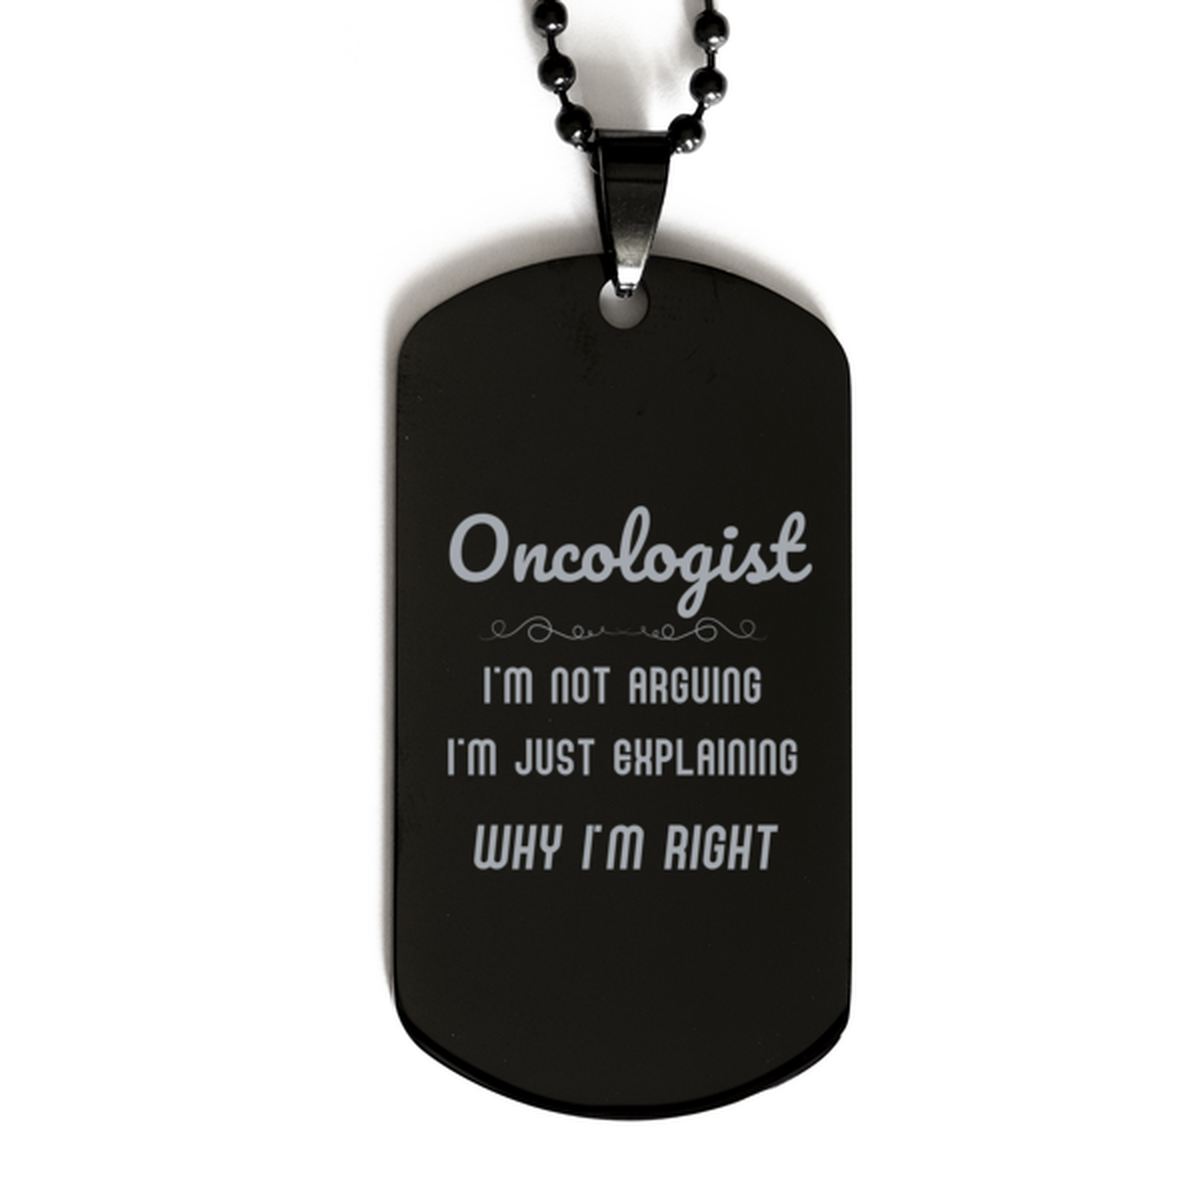 Oncologist I'm not Arguing. I'm Just Explaining Why I'm RIGHT Black Dog Tag, Funny Saying Quote Oncologist Gifts For Oncologist Graduation Birthday Christmas Gifts for Men Women Coworker